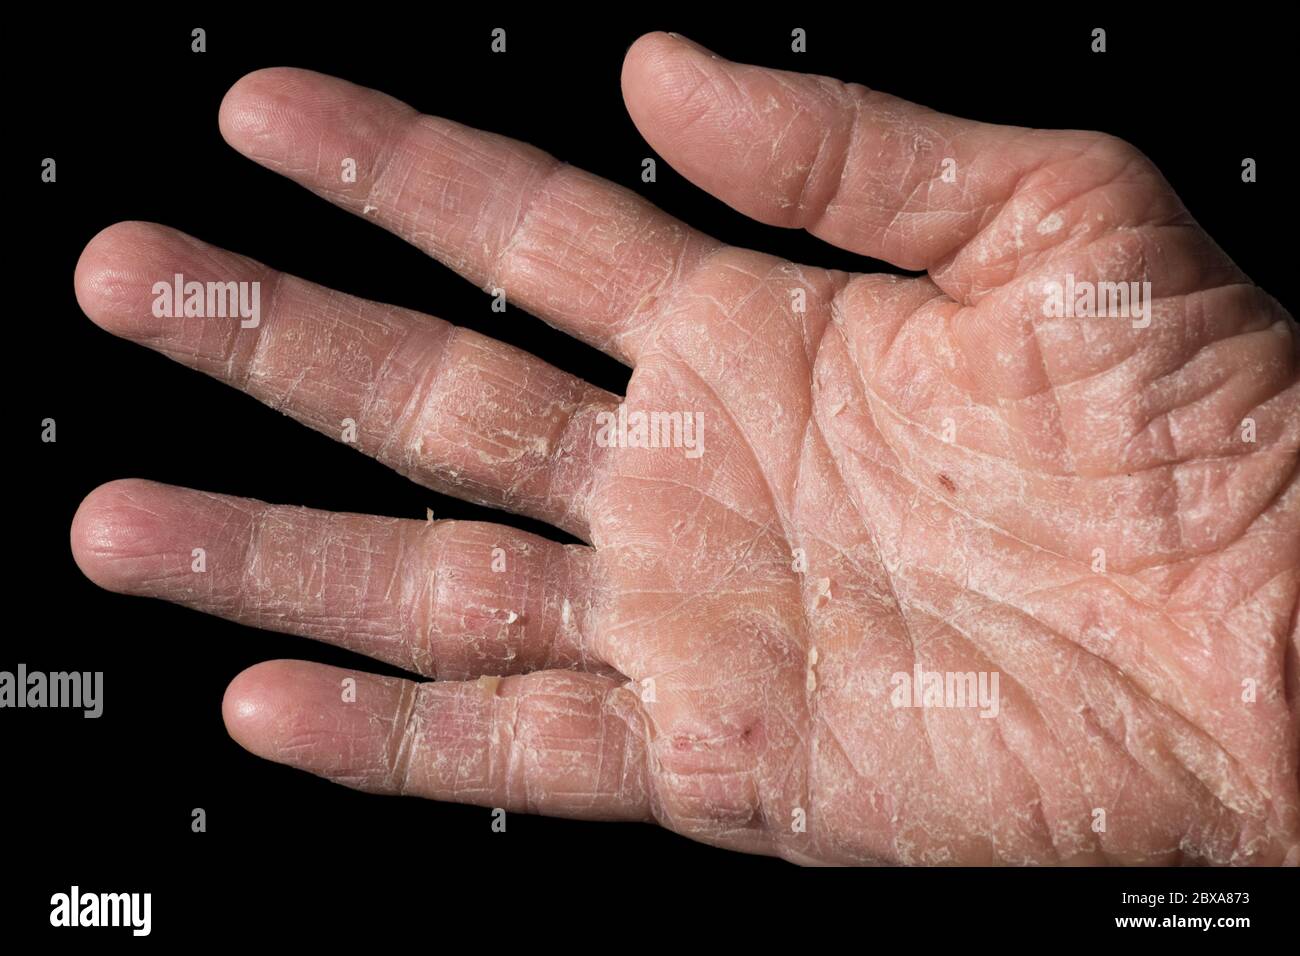 Eczema with redness, swellings, bumps and flakes on the hand and fingers of a man, caused by sun, atopy or contact allergens. Isolated on white Stock Photo